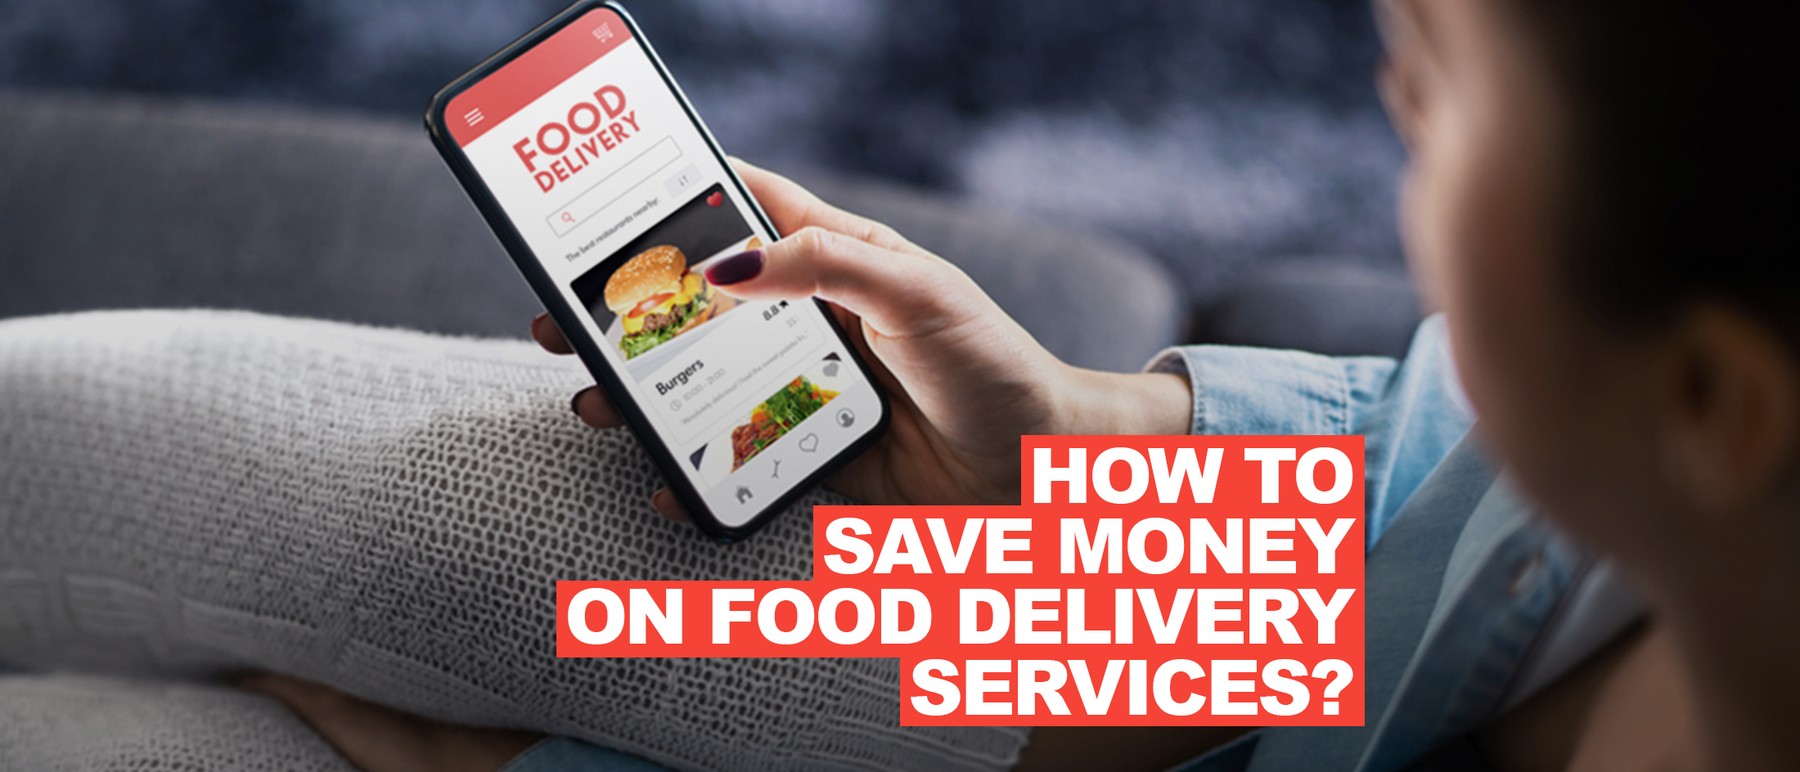 Fast Food: How to Save Money on Food Delivery